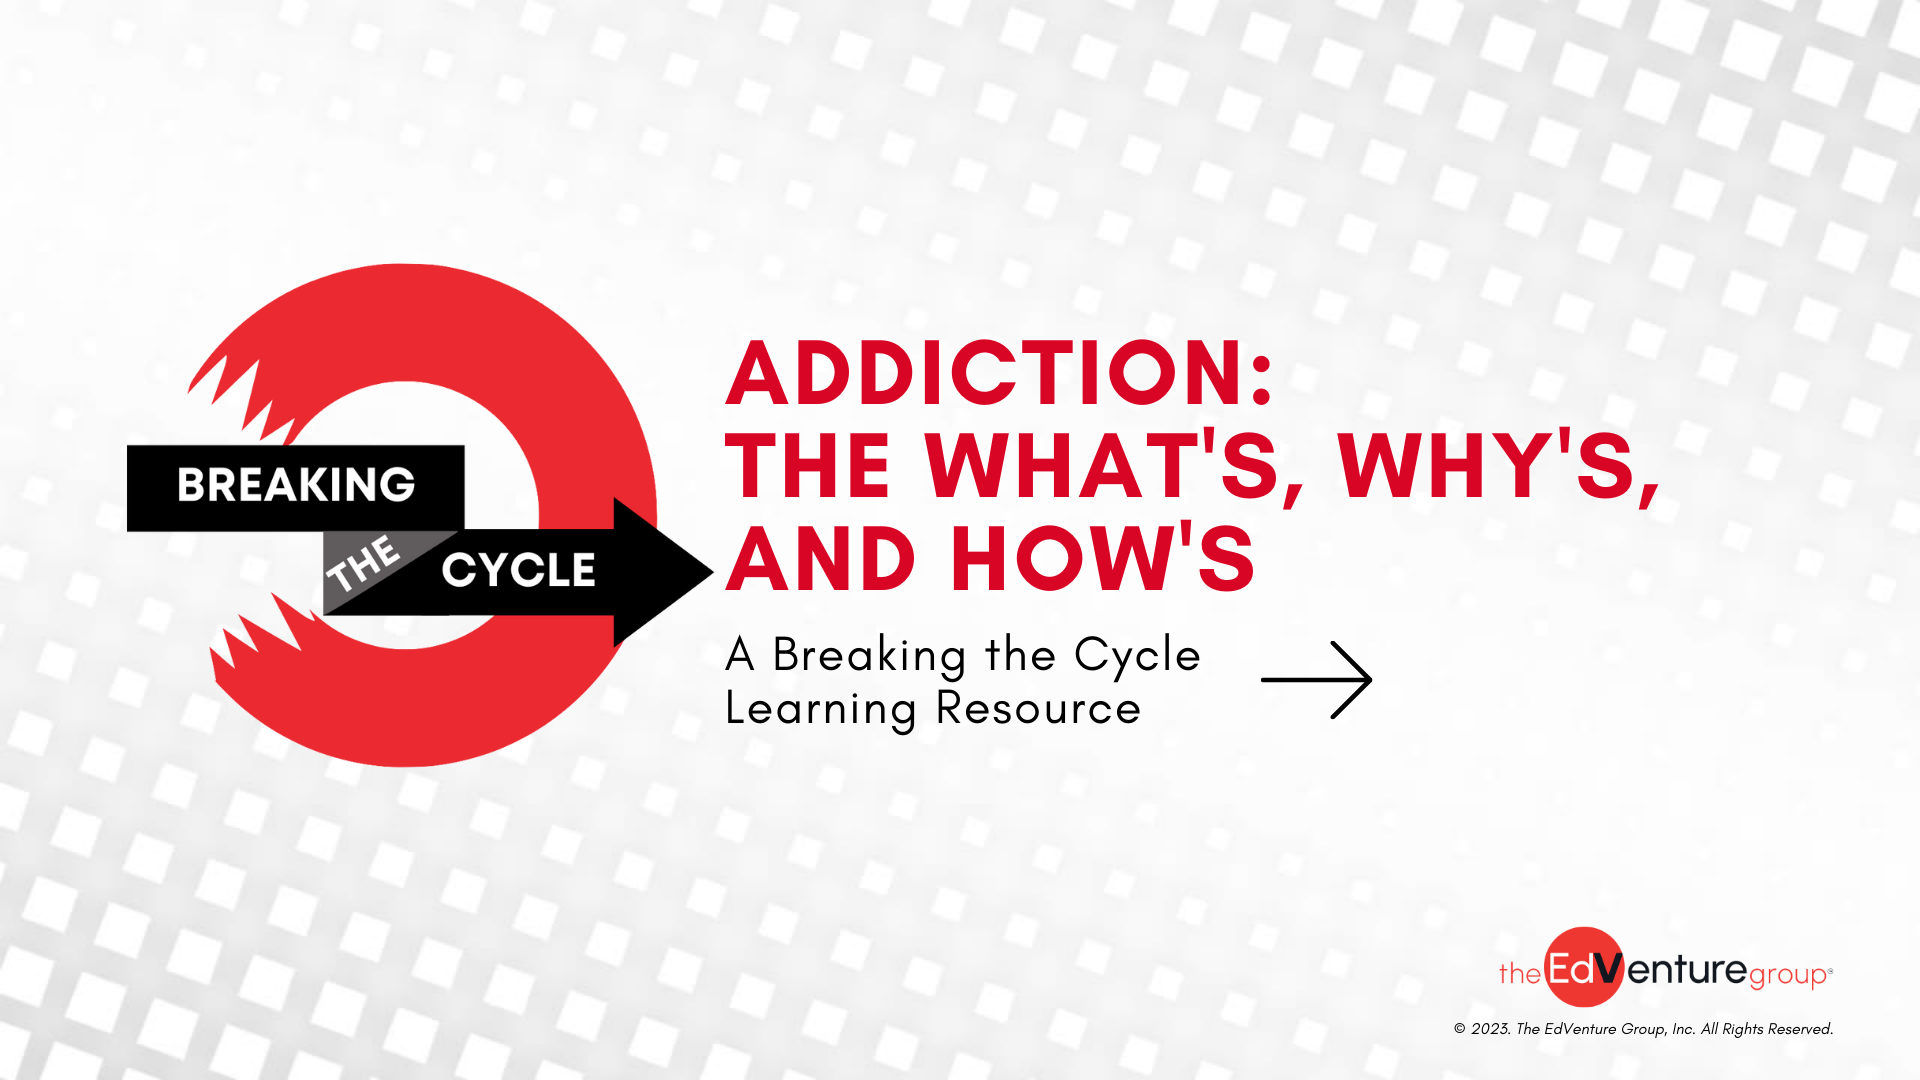 Addiction The What's, Why's, and How's